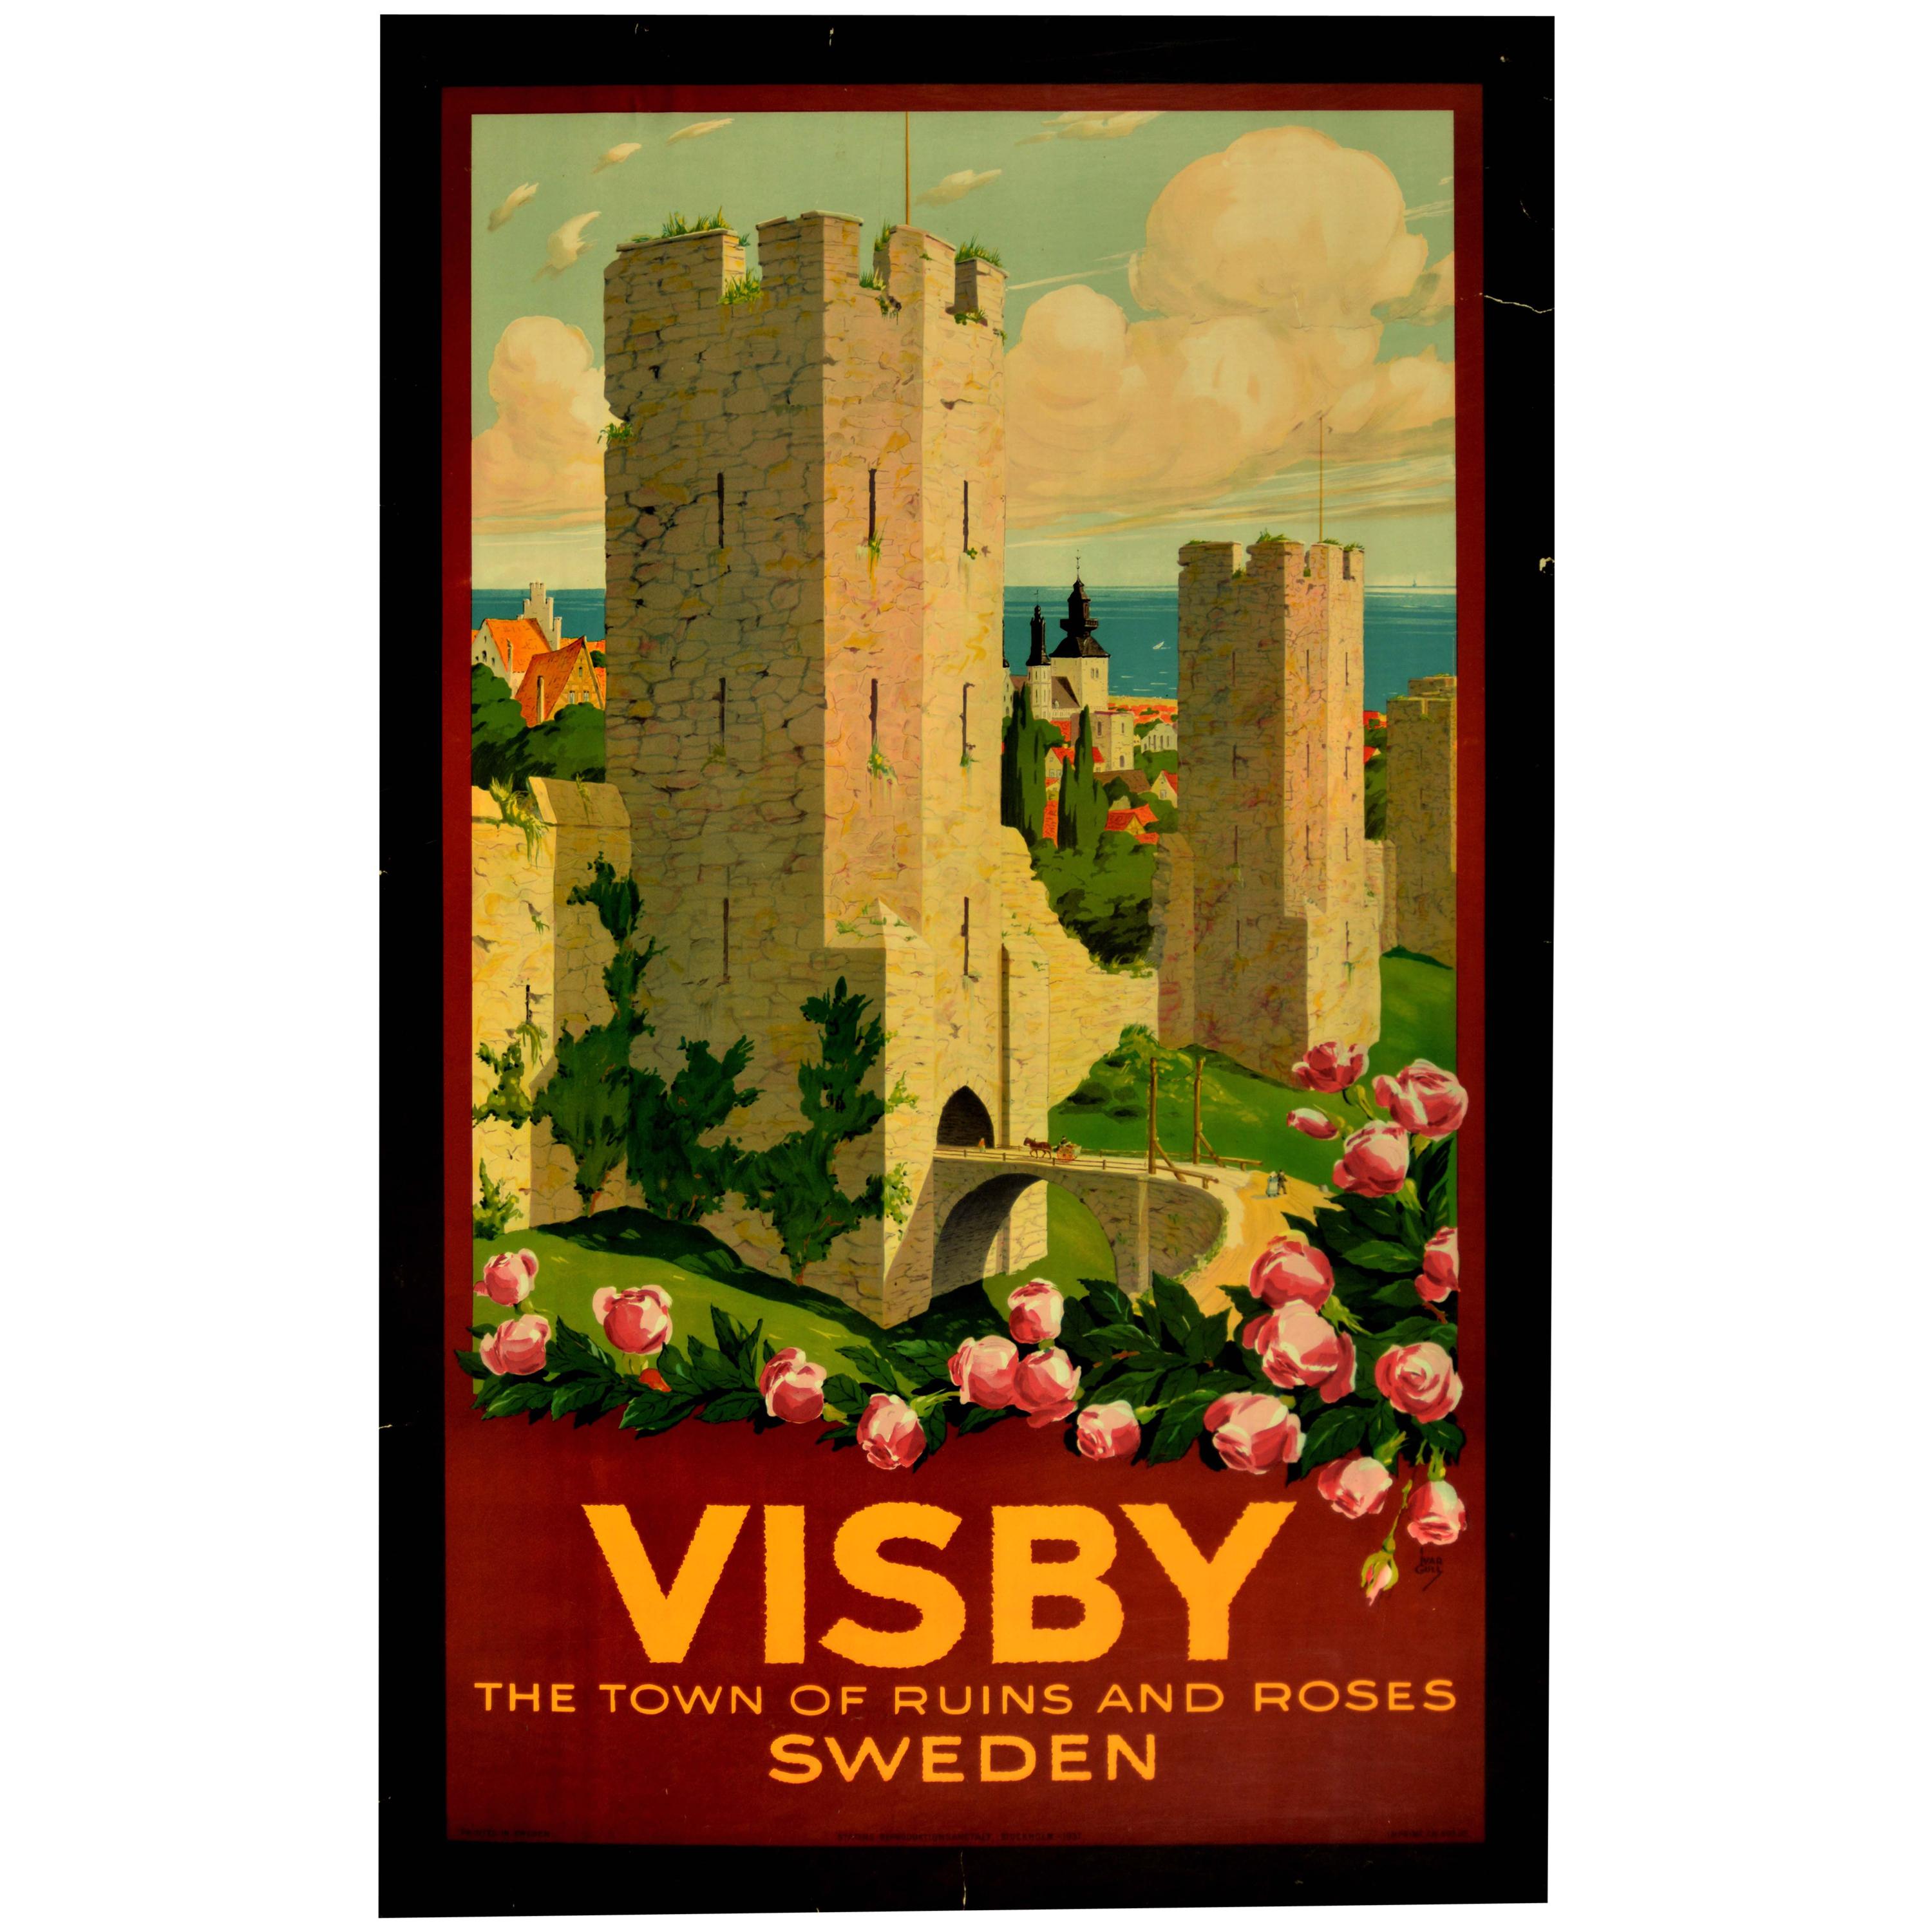 Original Vintage Poster Visby Town Ruins Roses Sweden Travel Medieval City Wall